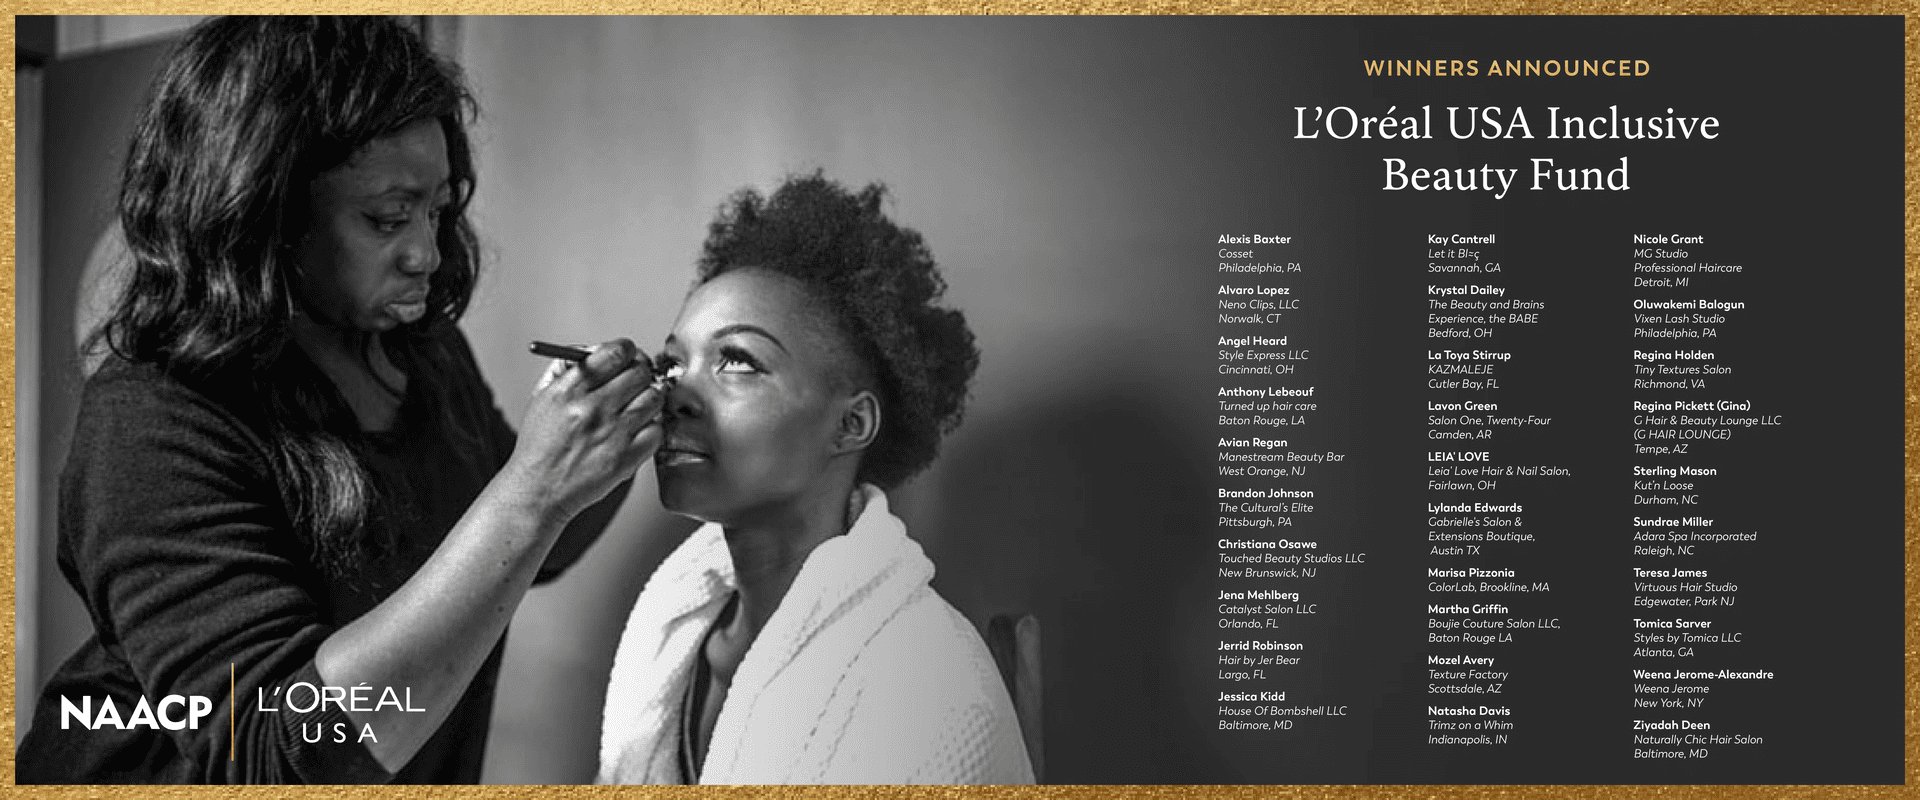 L'Oréal USA: 30 Black-Owned Small Businesses and Black Entrepreneurs in the Beauty  Industry Awarded Grants by L'Oréal USA in Partnership with NAACP